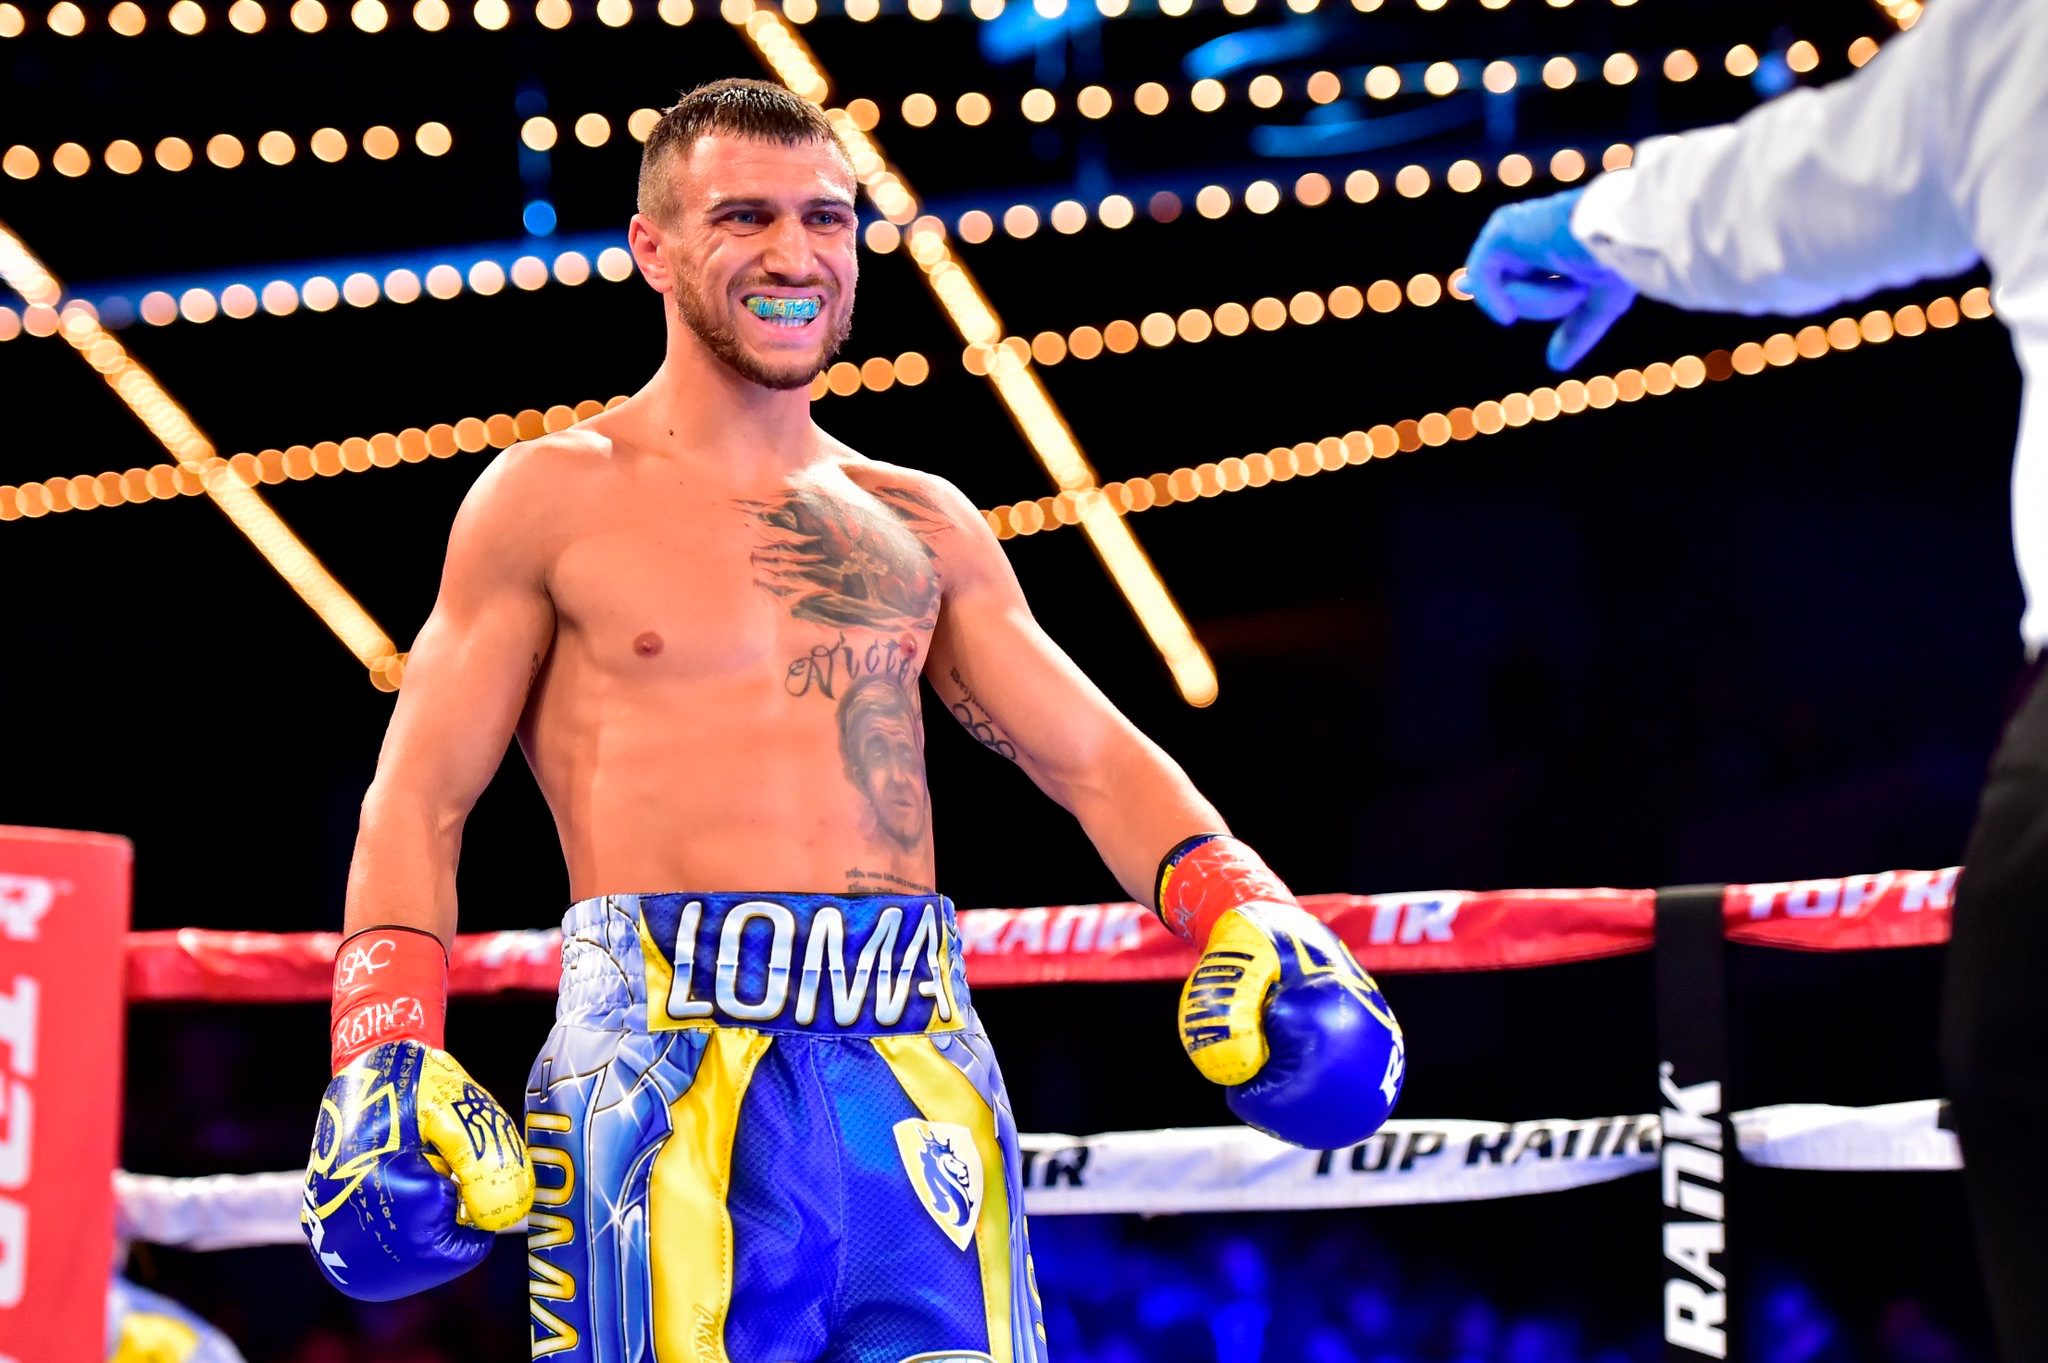 Ukraine’s Lomachenko returns to ring after fighting for his country